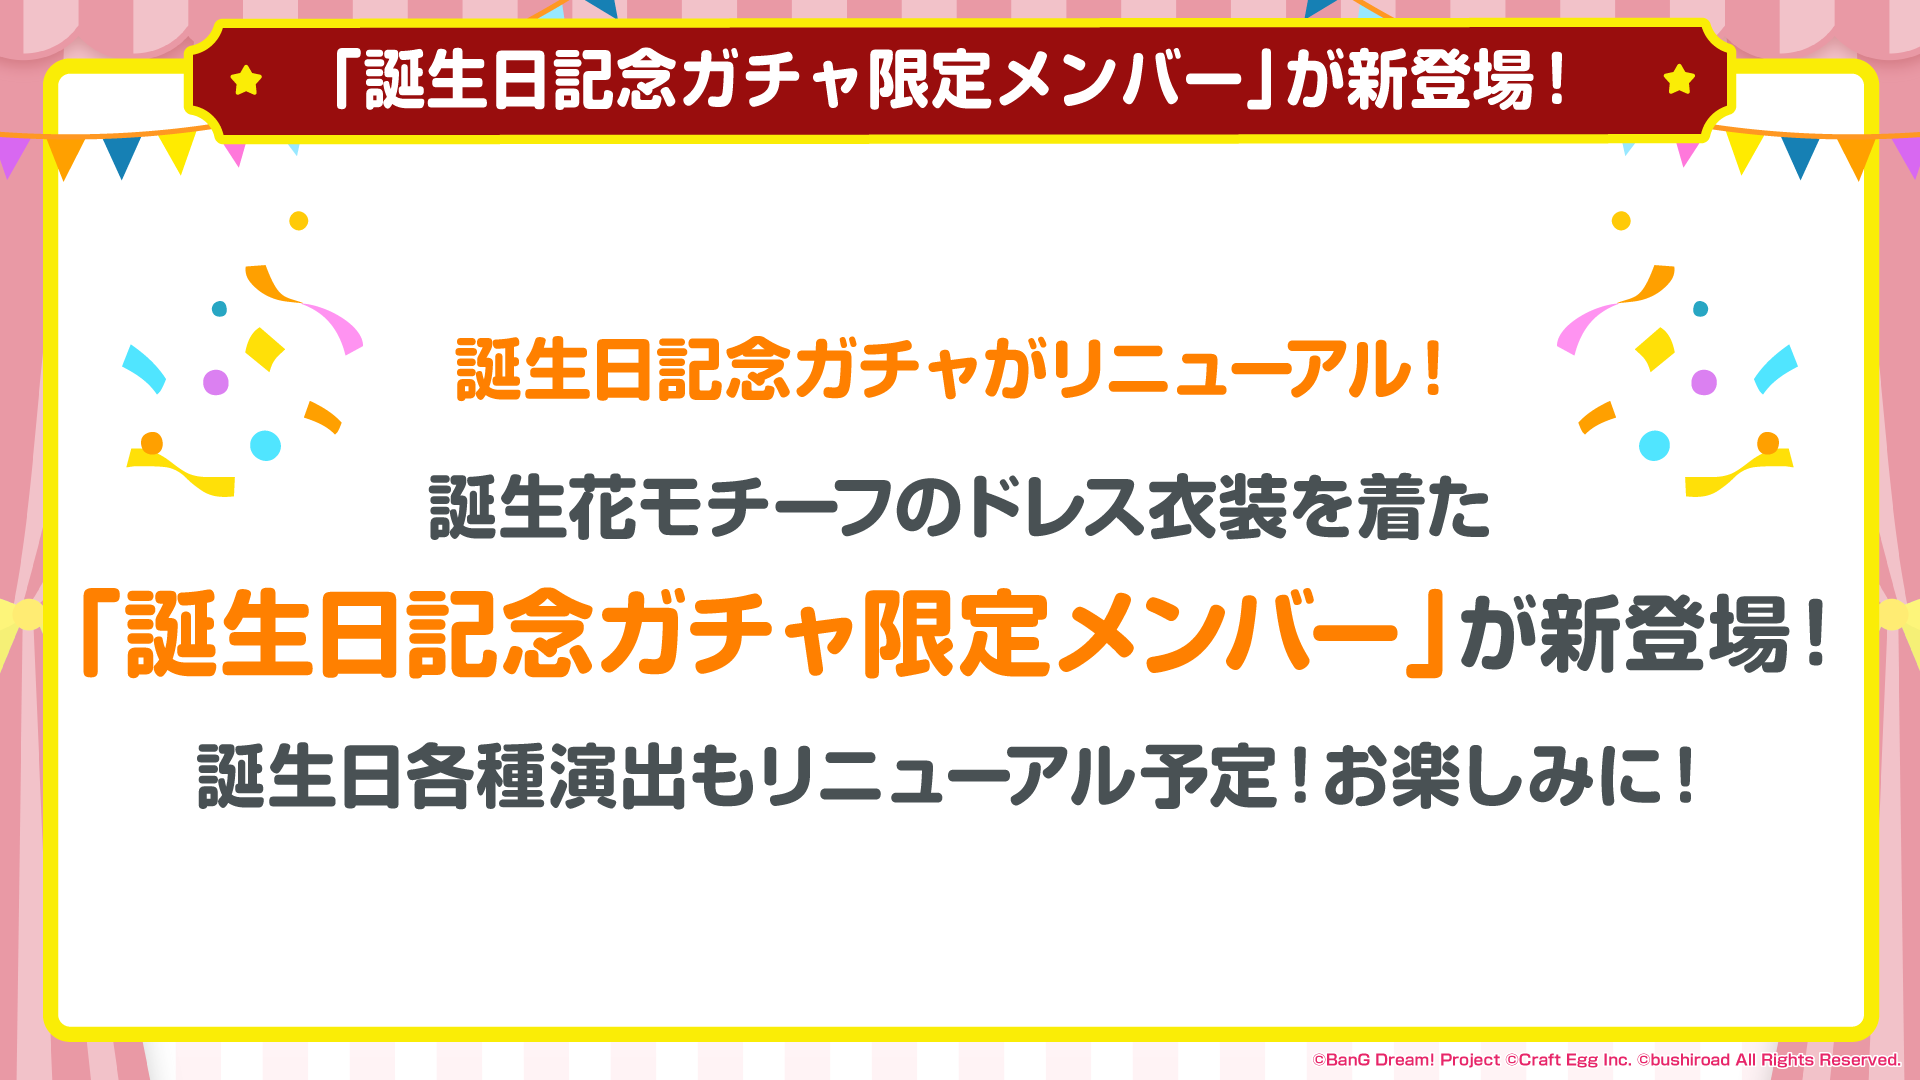 Twitter 上的bang Dream Updates Starting From The 4th Anniversary All Characters Will Now Have A Special Limited Birthday Gacha Card Featuring Them In Dresses That Are Themed After The Flower That Represent